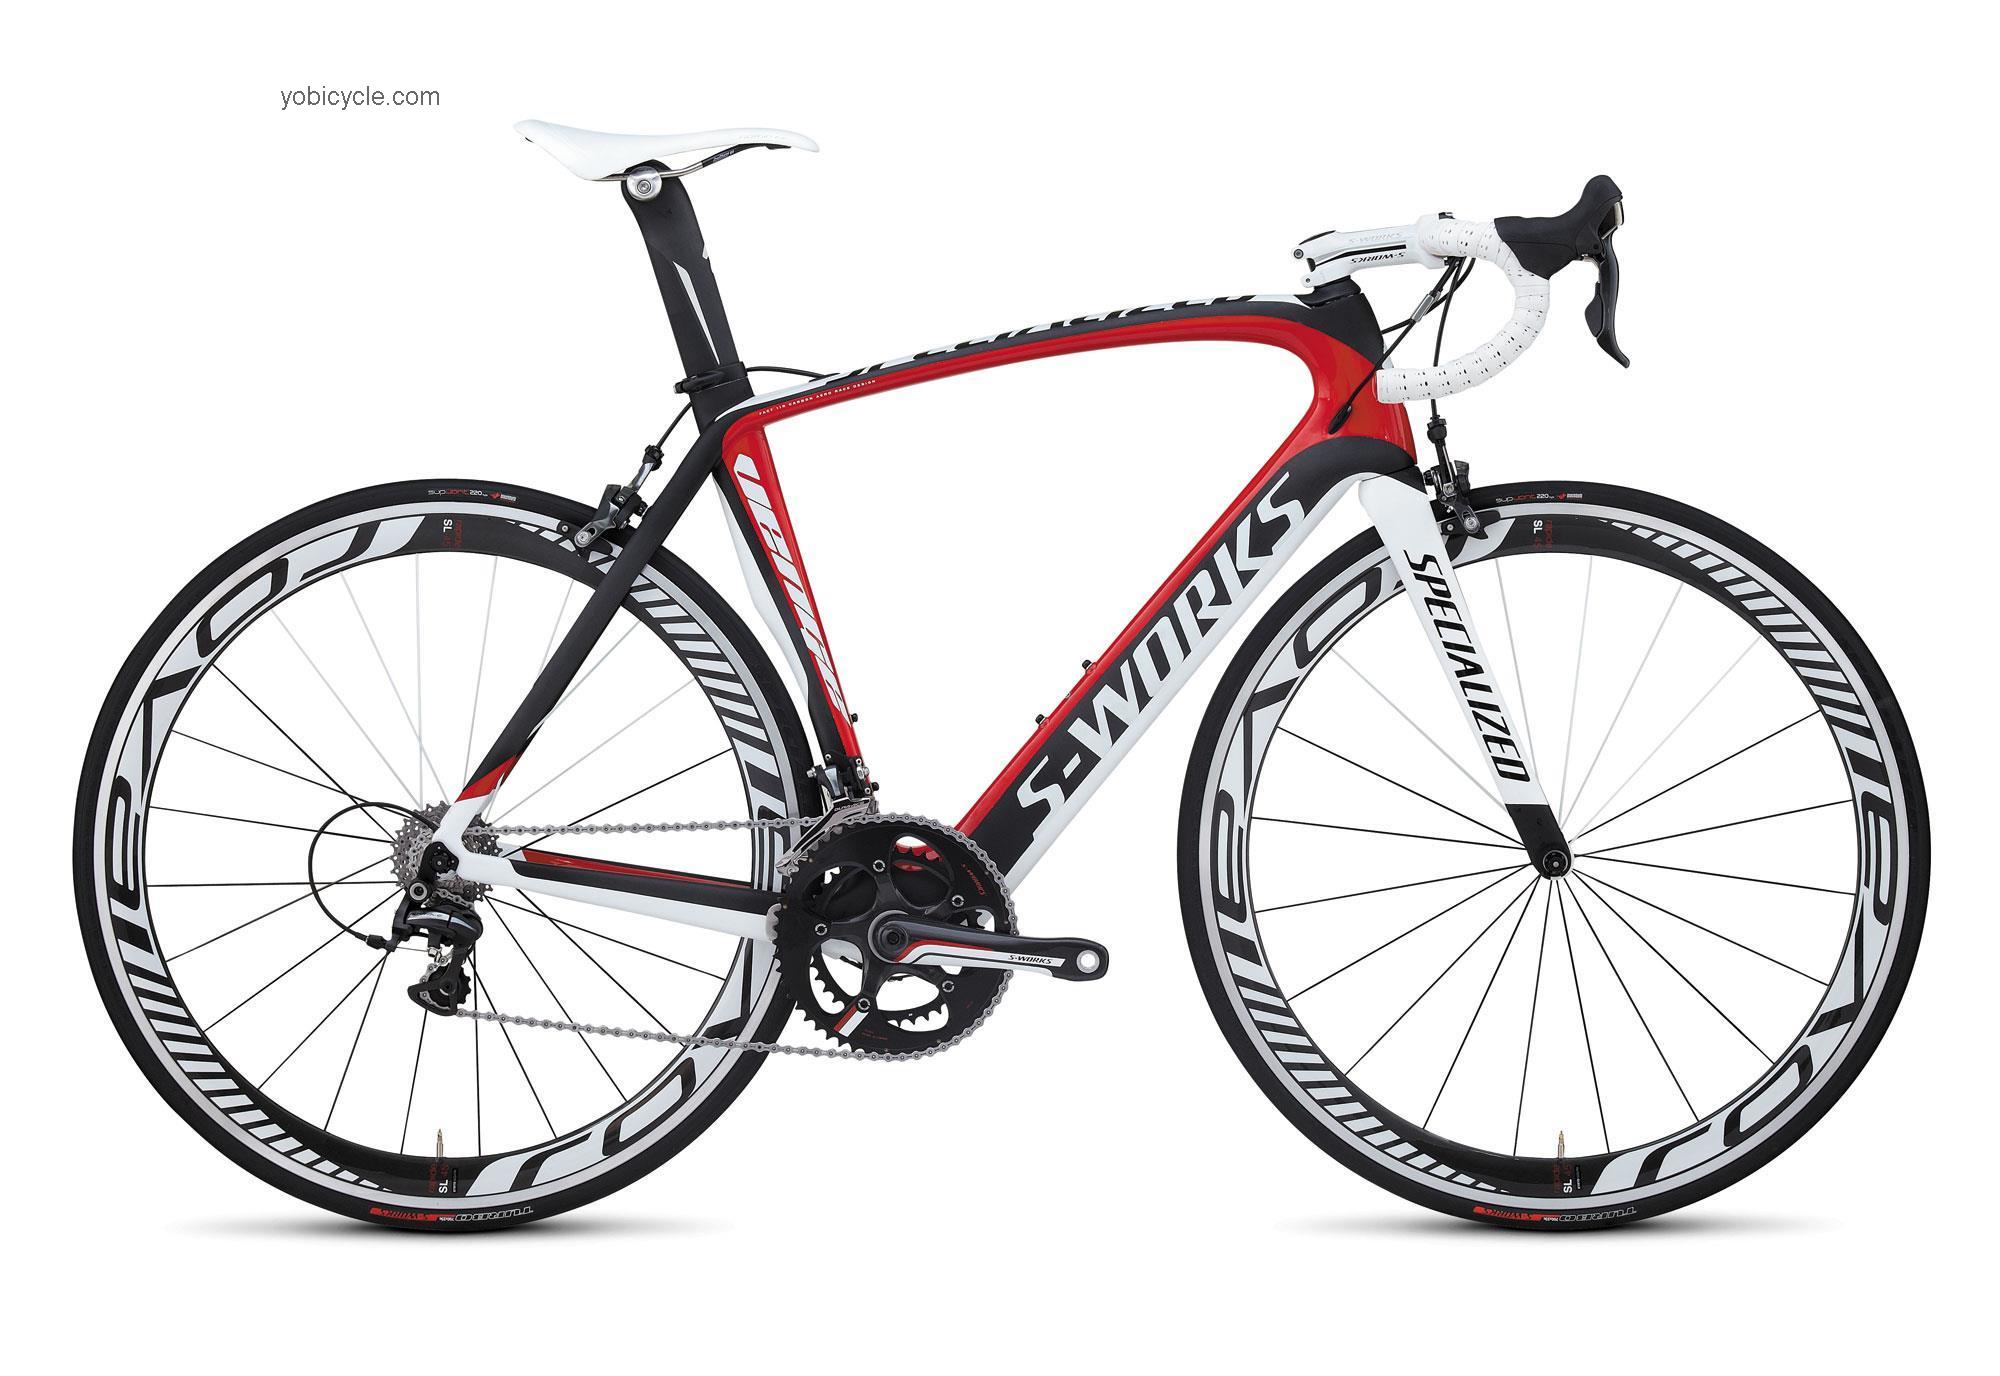 Specialized  S-Works Venge Dura-Ace Technical data and specifications